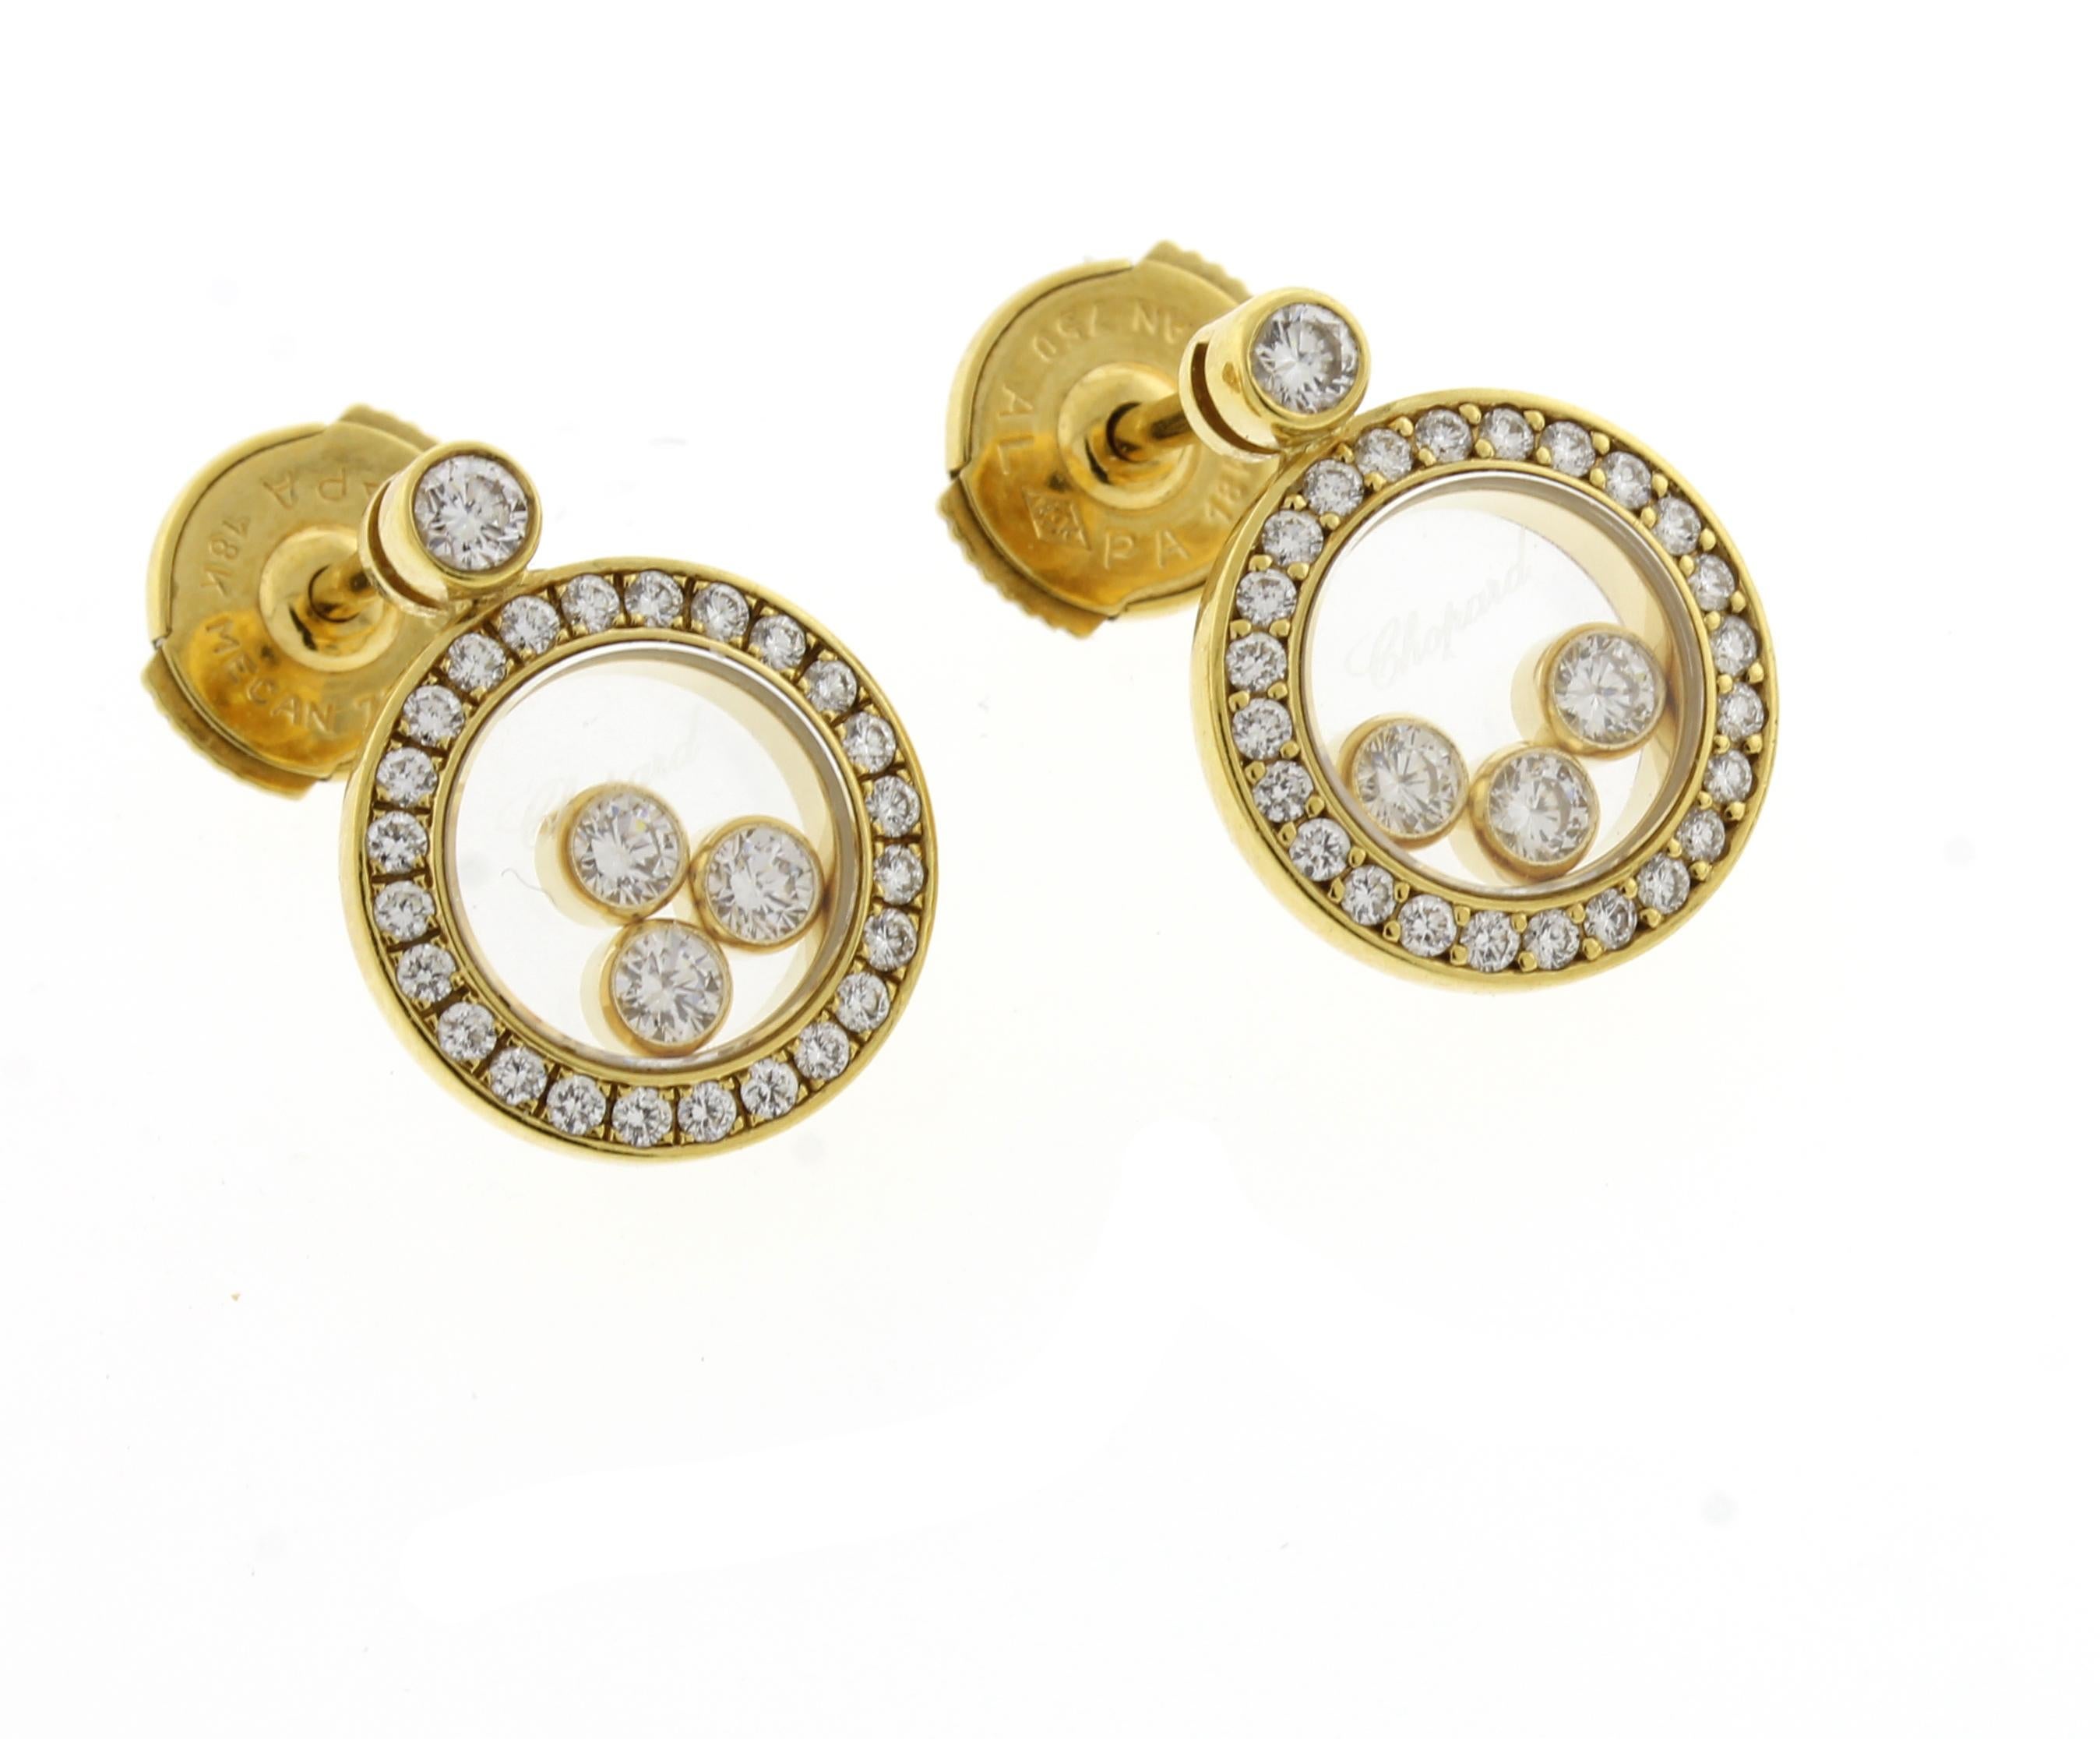 From Chopard a pair of round drop happy diamond earrings.
•  Chopard
•  18 karat gold
• Circa: 2015 
• Size: 11.5mm in diameter 
• 56 diamonds weigh .72 carats
• Pampillonia box	
  
 